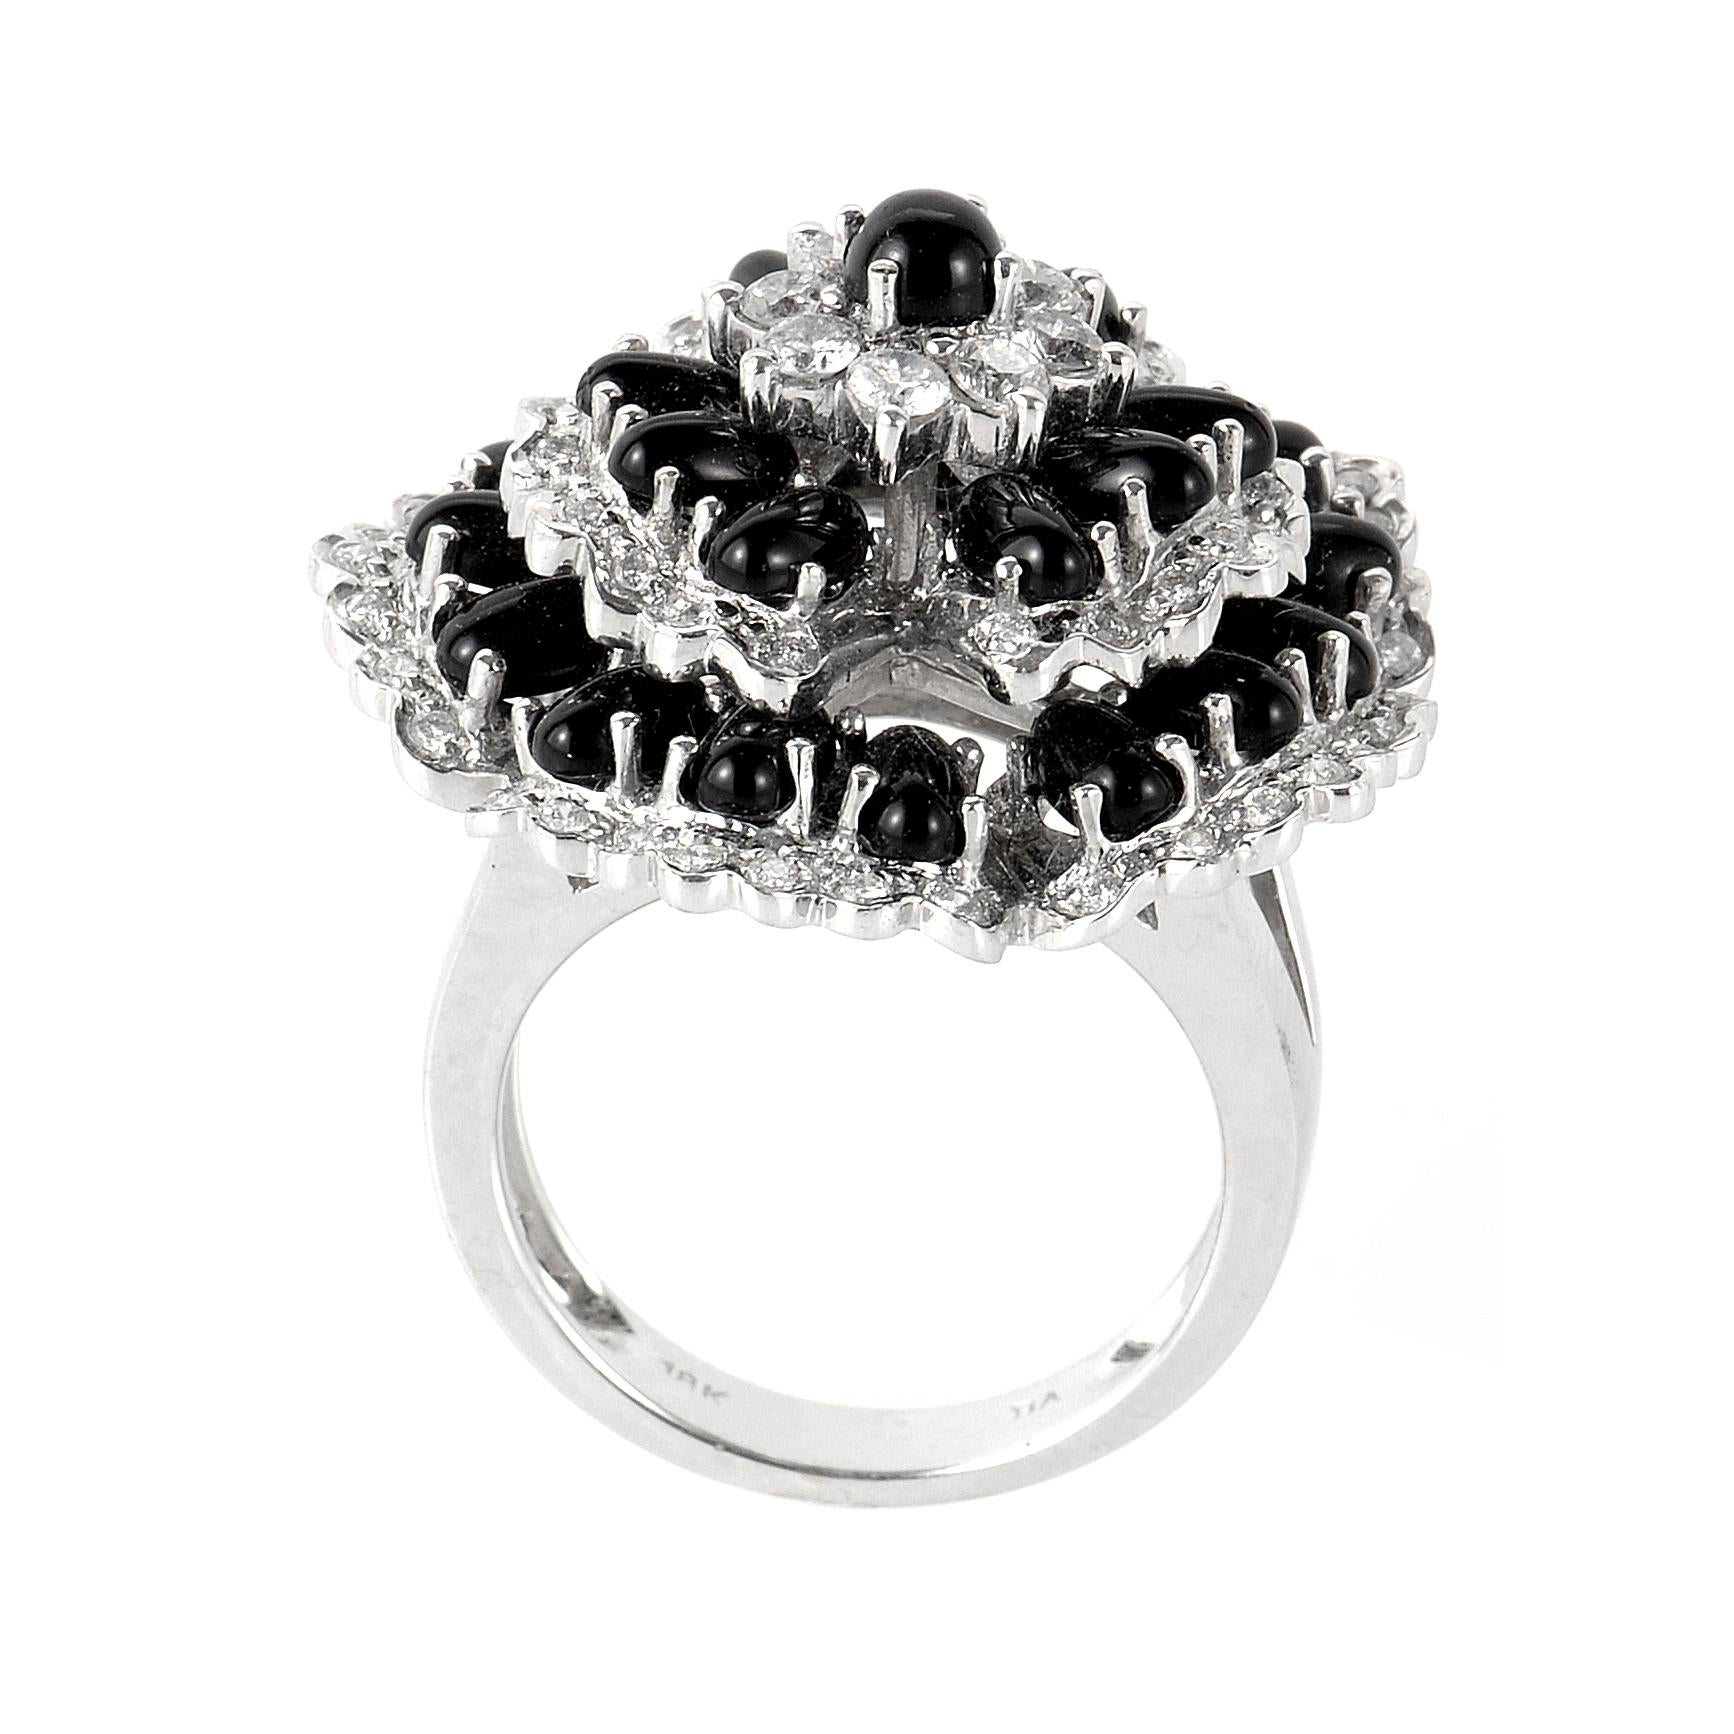 This ring is opulent and shines with diamonds. This fabulous ring is made of 18K white gold and is made to look like a flower. The flower is set with ~.83ct of diamonds and onyx beads. 
Ring Size: 6.75